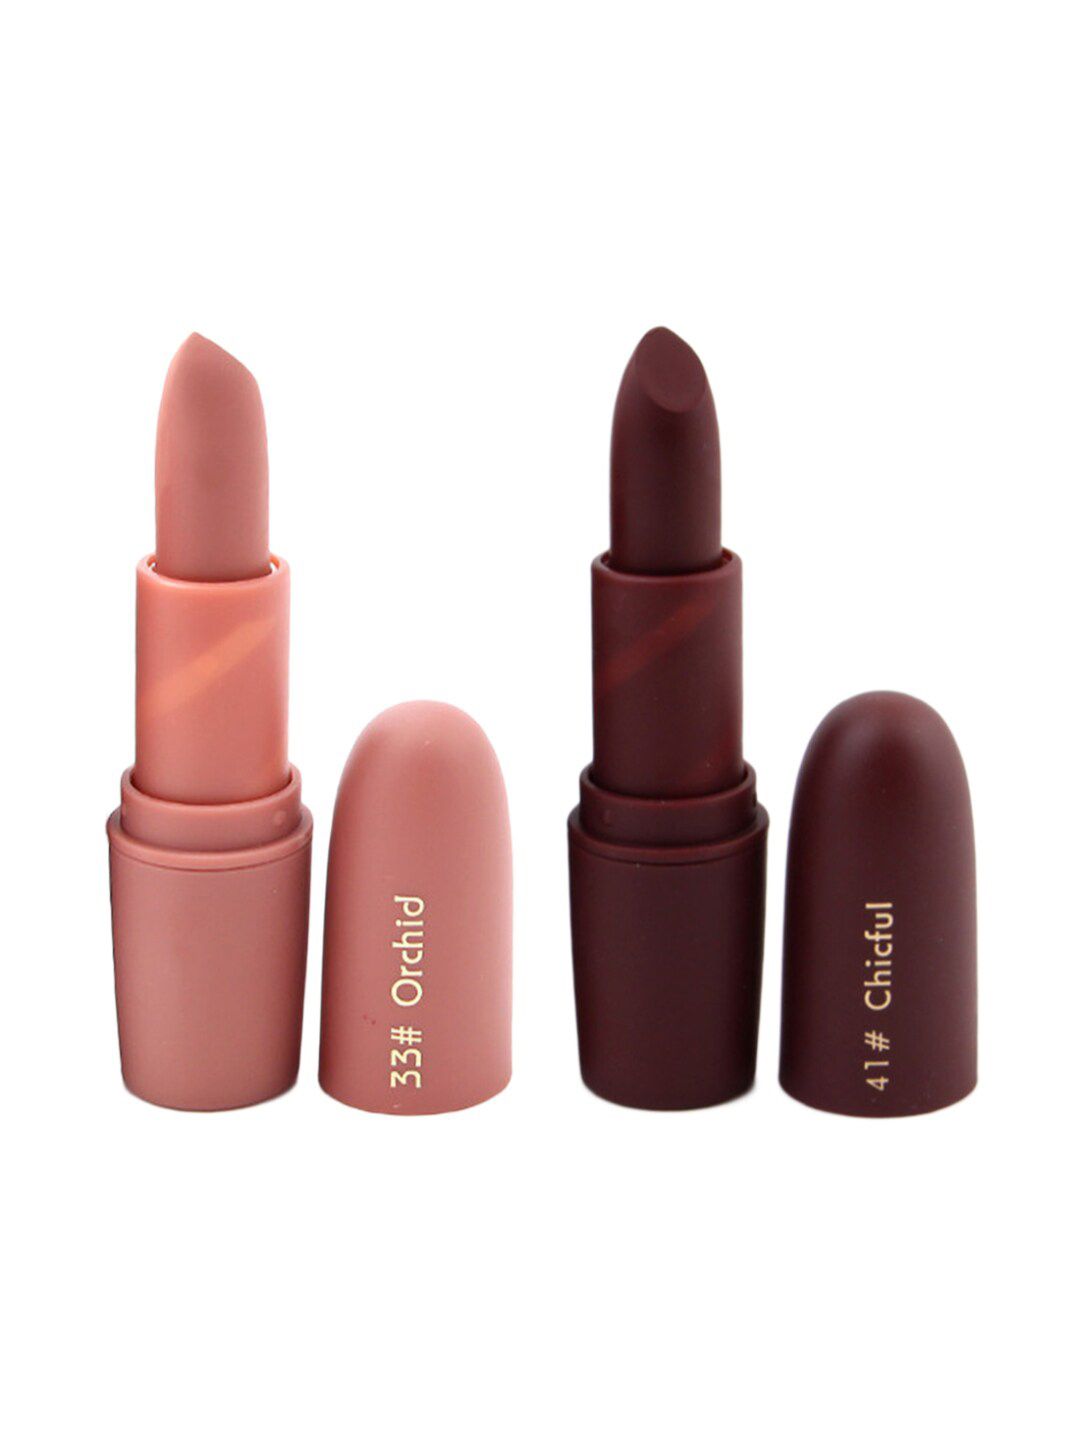 MISS ROSE Professional Make-Up Set of 2 Matte Creamy Lipsticks - Orchid 33 & Chicful 41 Price in India